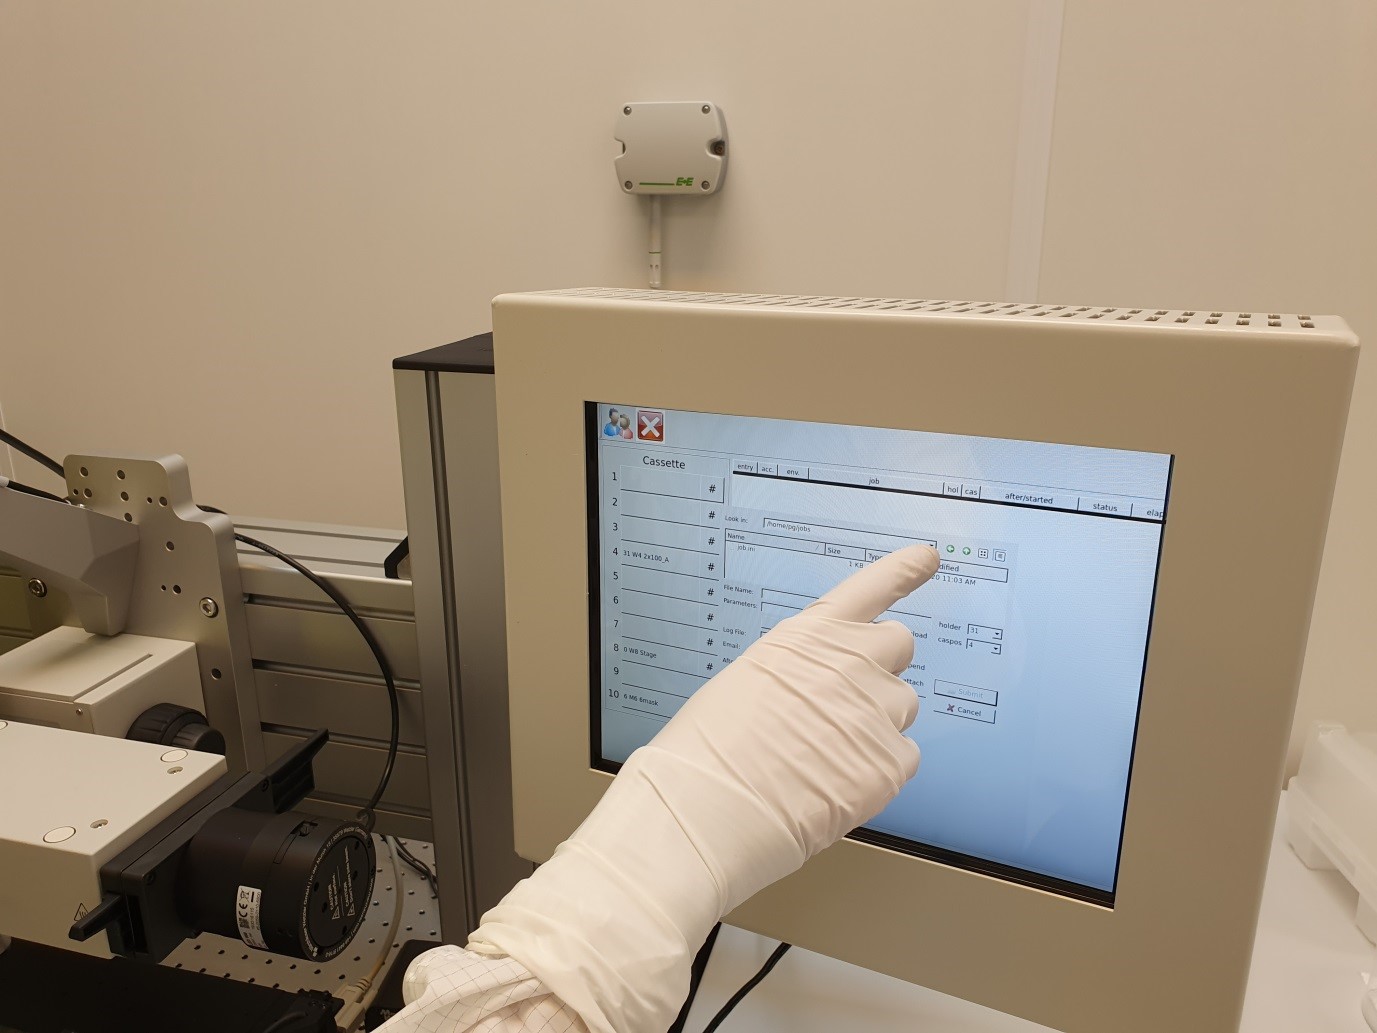 Photo of the touch screen available for the EBPG alignment microscope